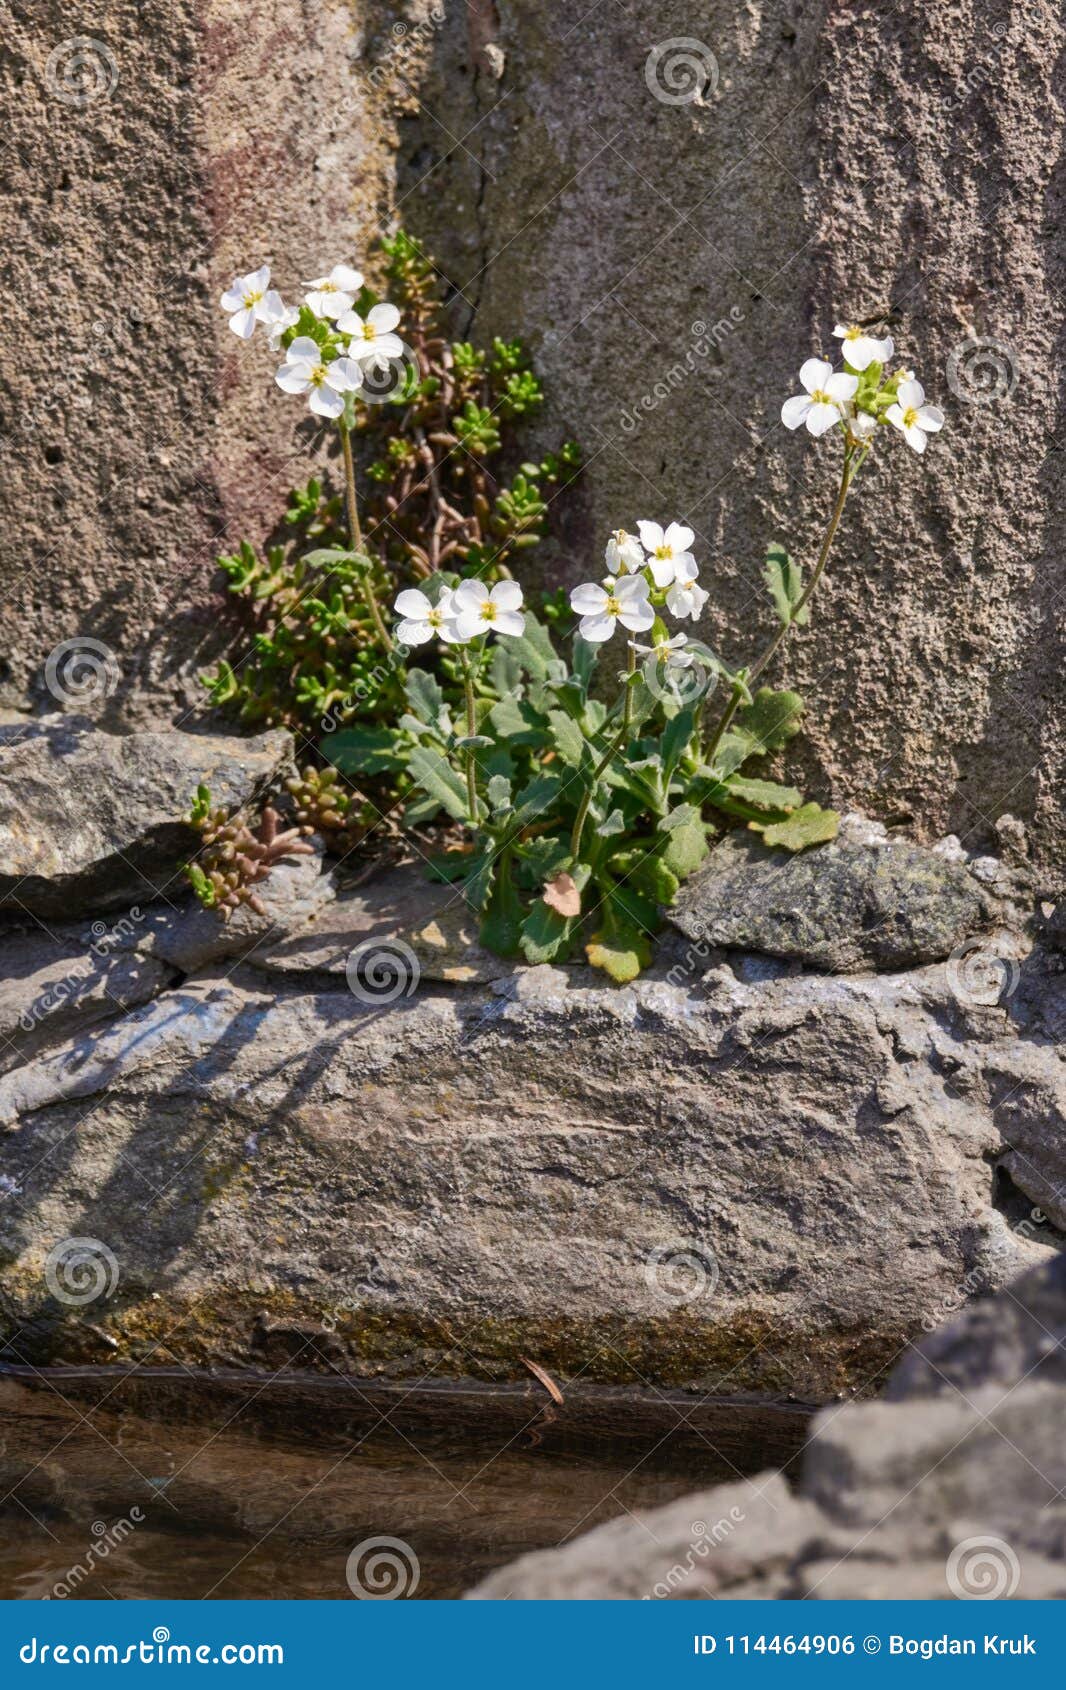 white arabis caucasica flowers growing on a rocky ground